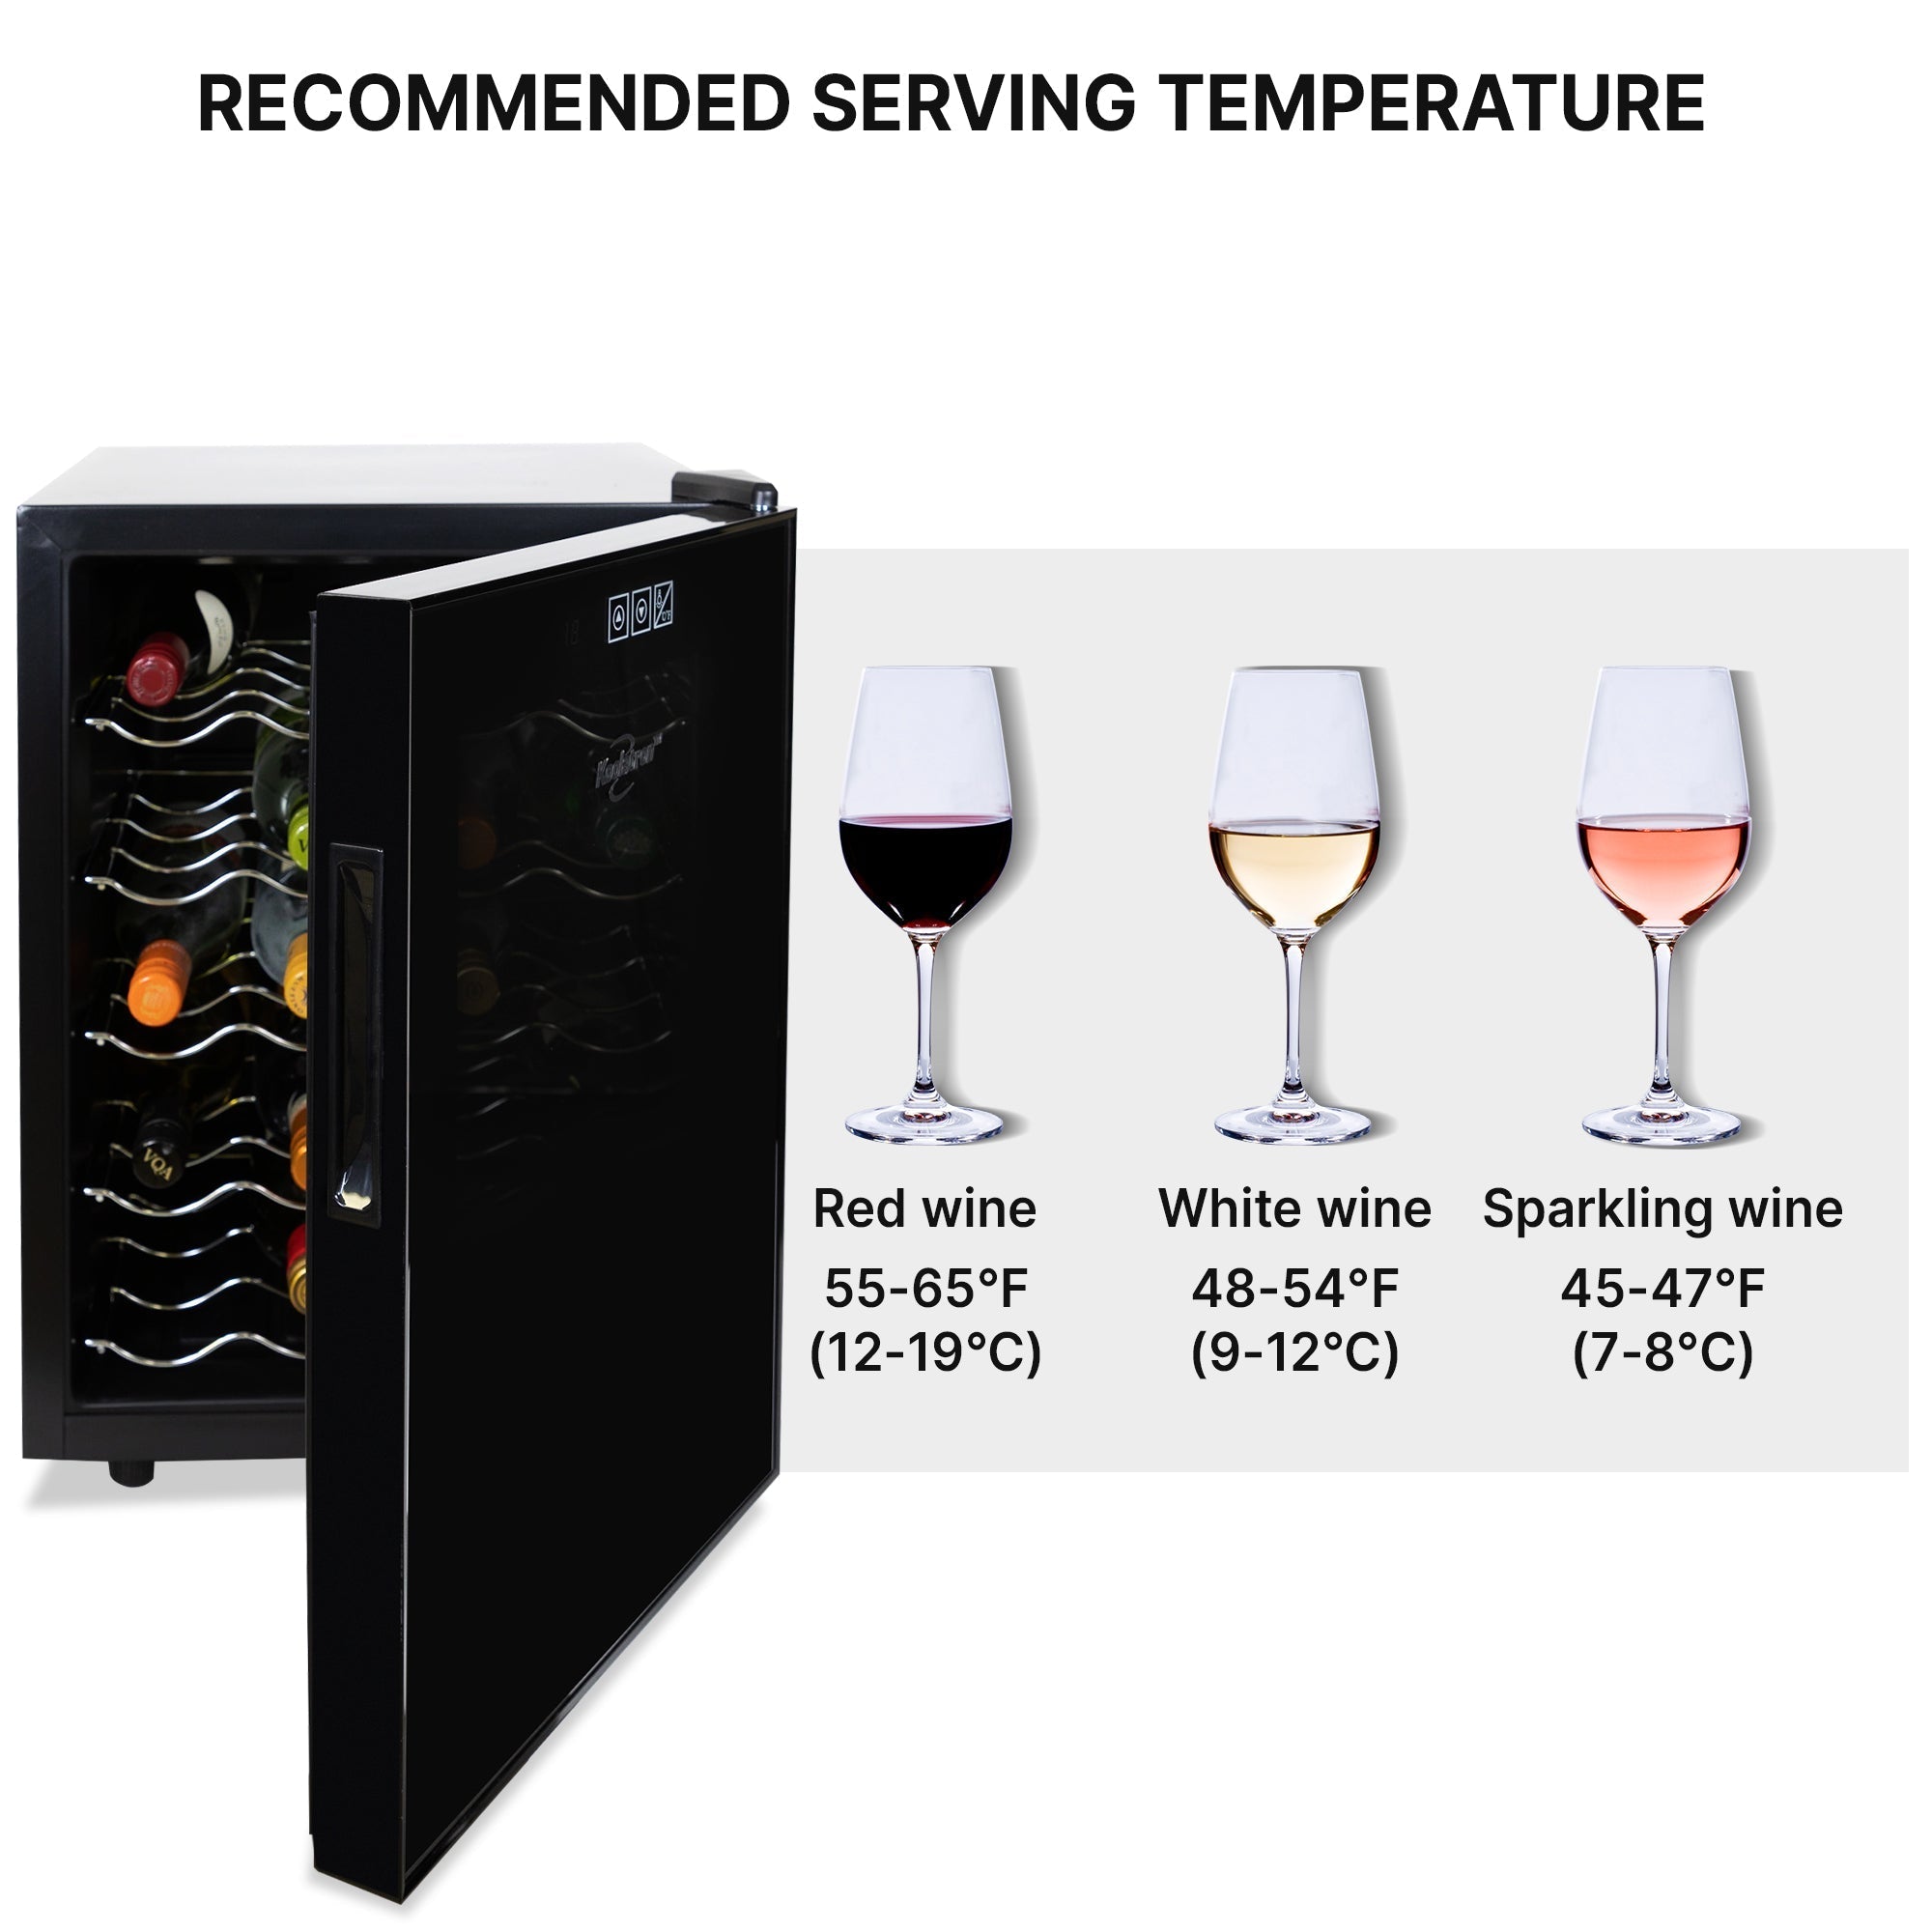 Koolatron 20 bottle wine fridge, open, with pictures of three wine glasses to the right containing red, white, and rose wines; Text above reads "Recommended serving temperature" and text below each glass describes the ideal temperature